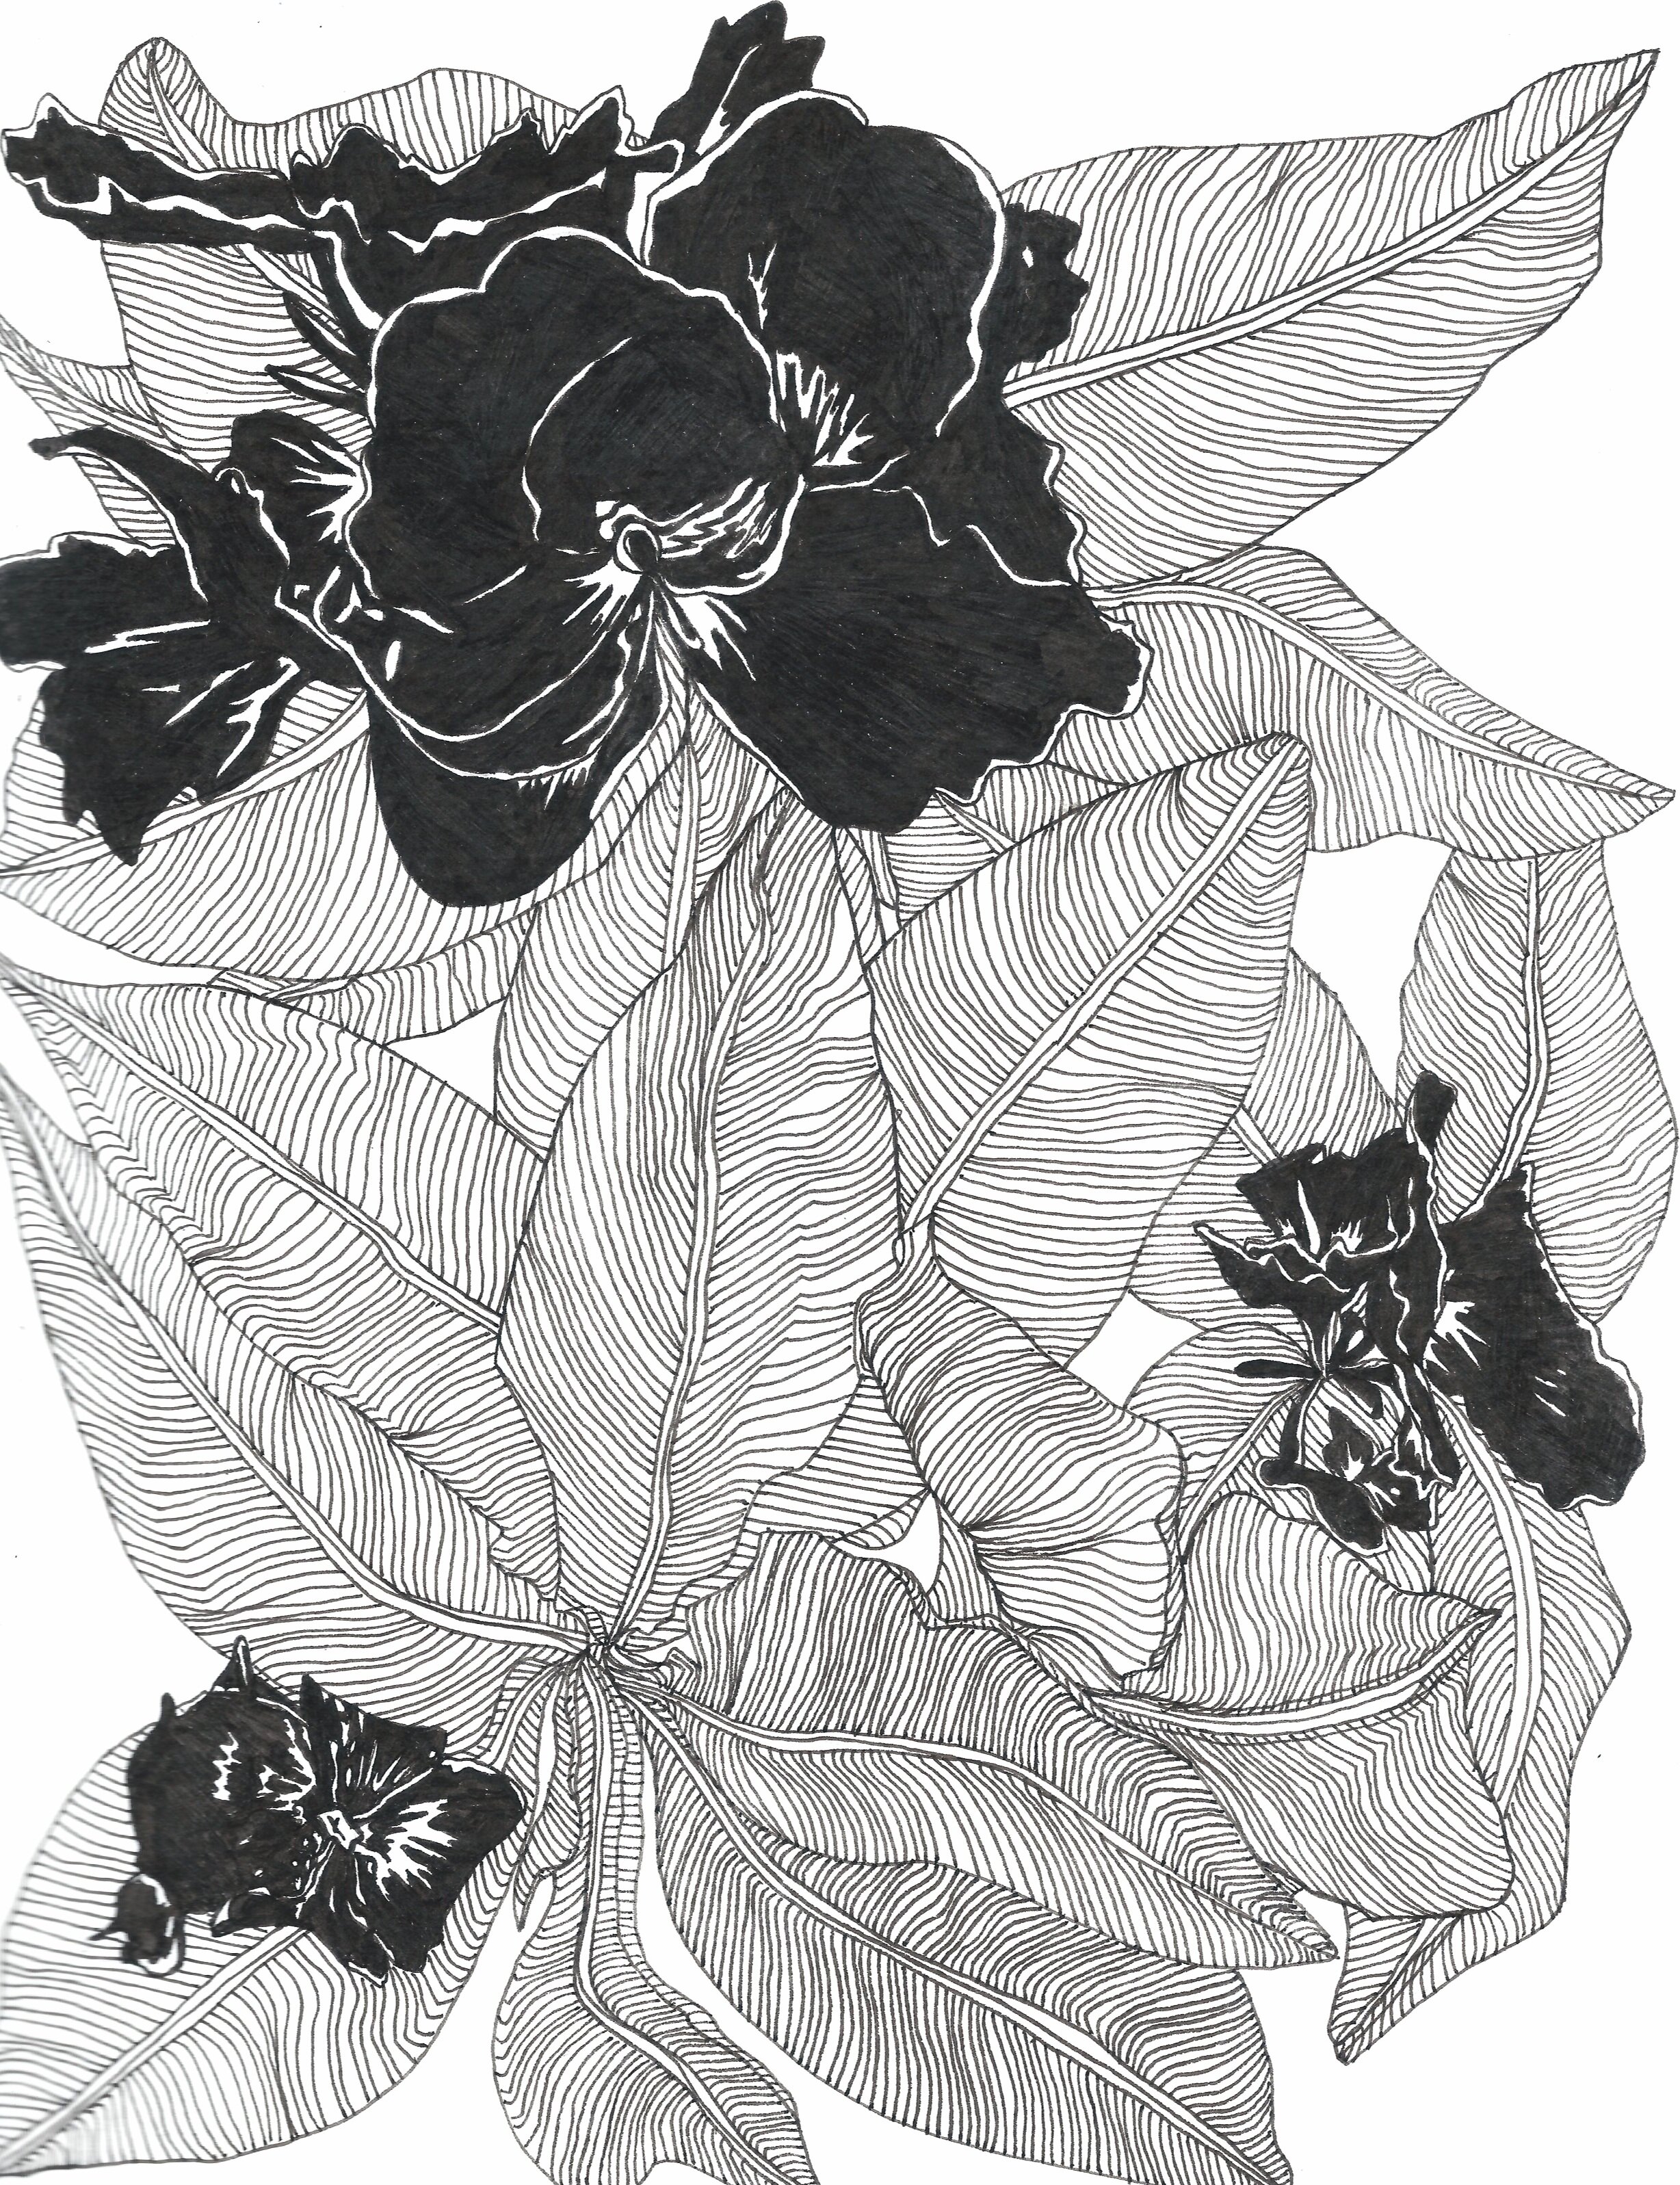   Canna indica,  Ink Pen on Paper, 8 x 10”, 2019 